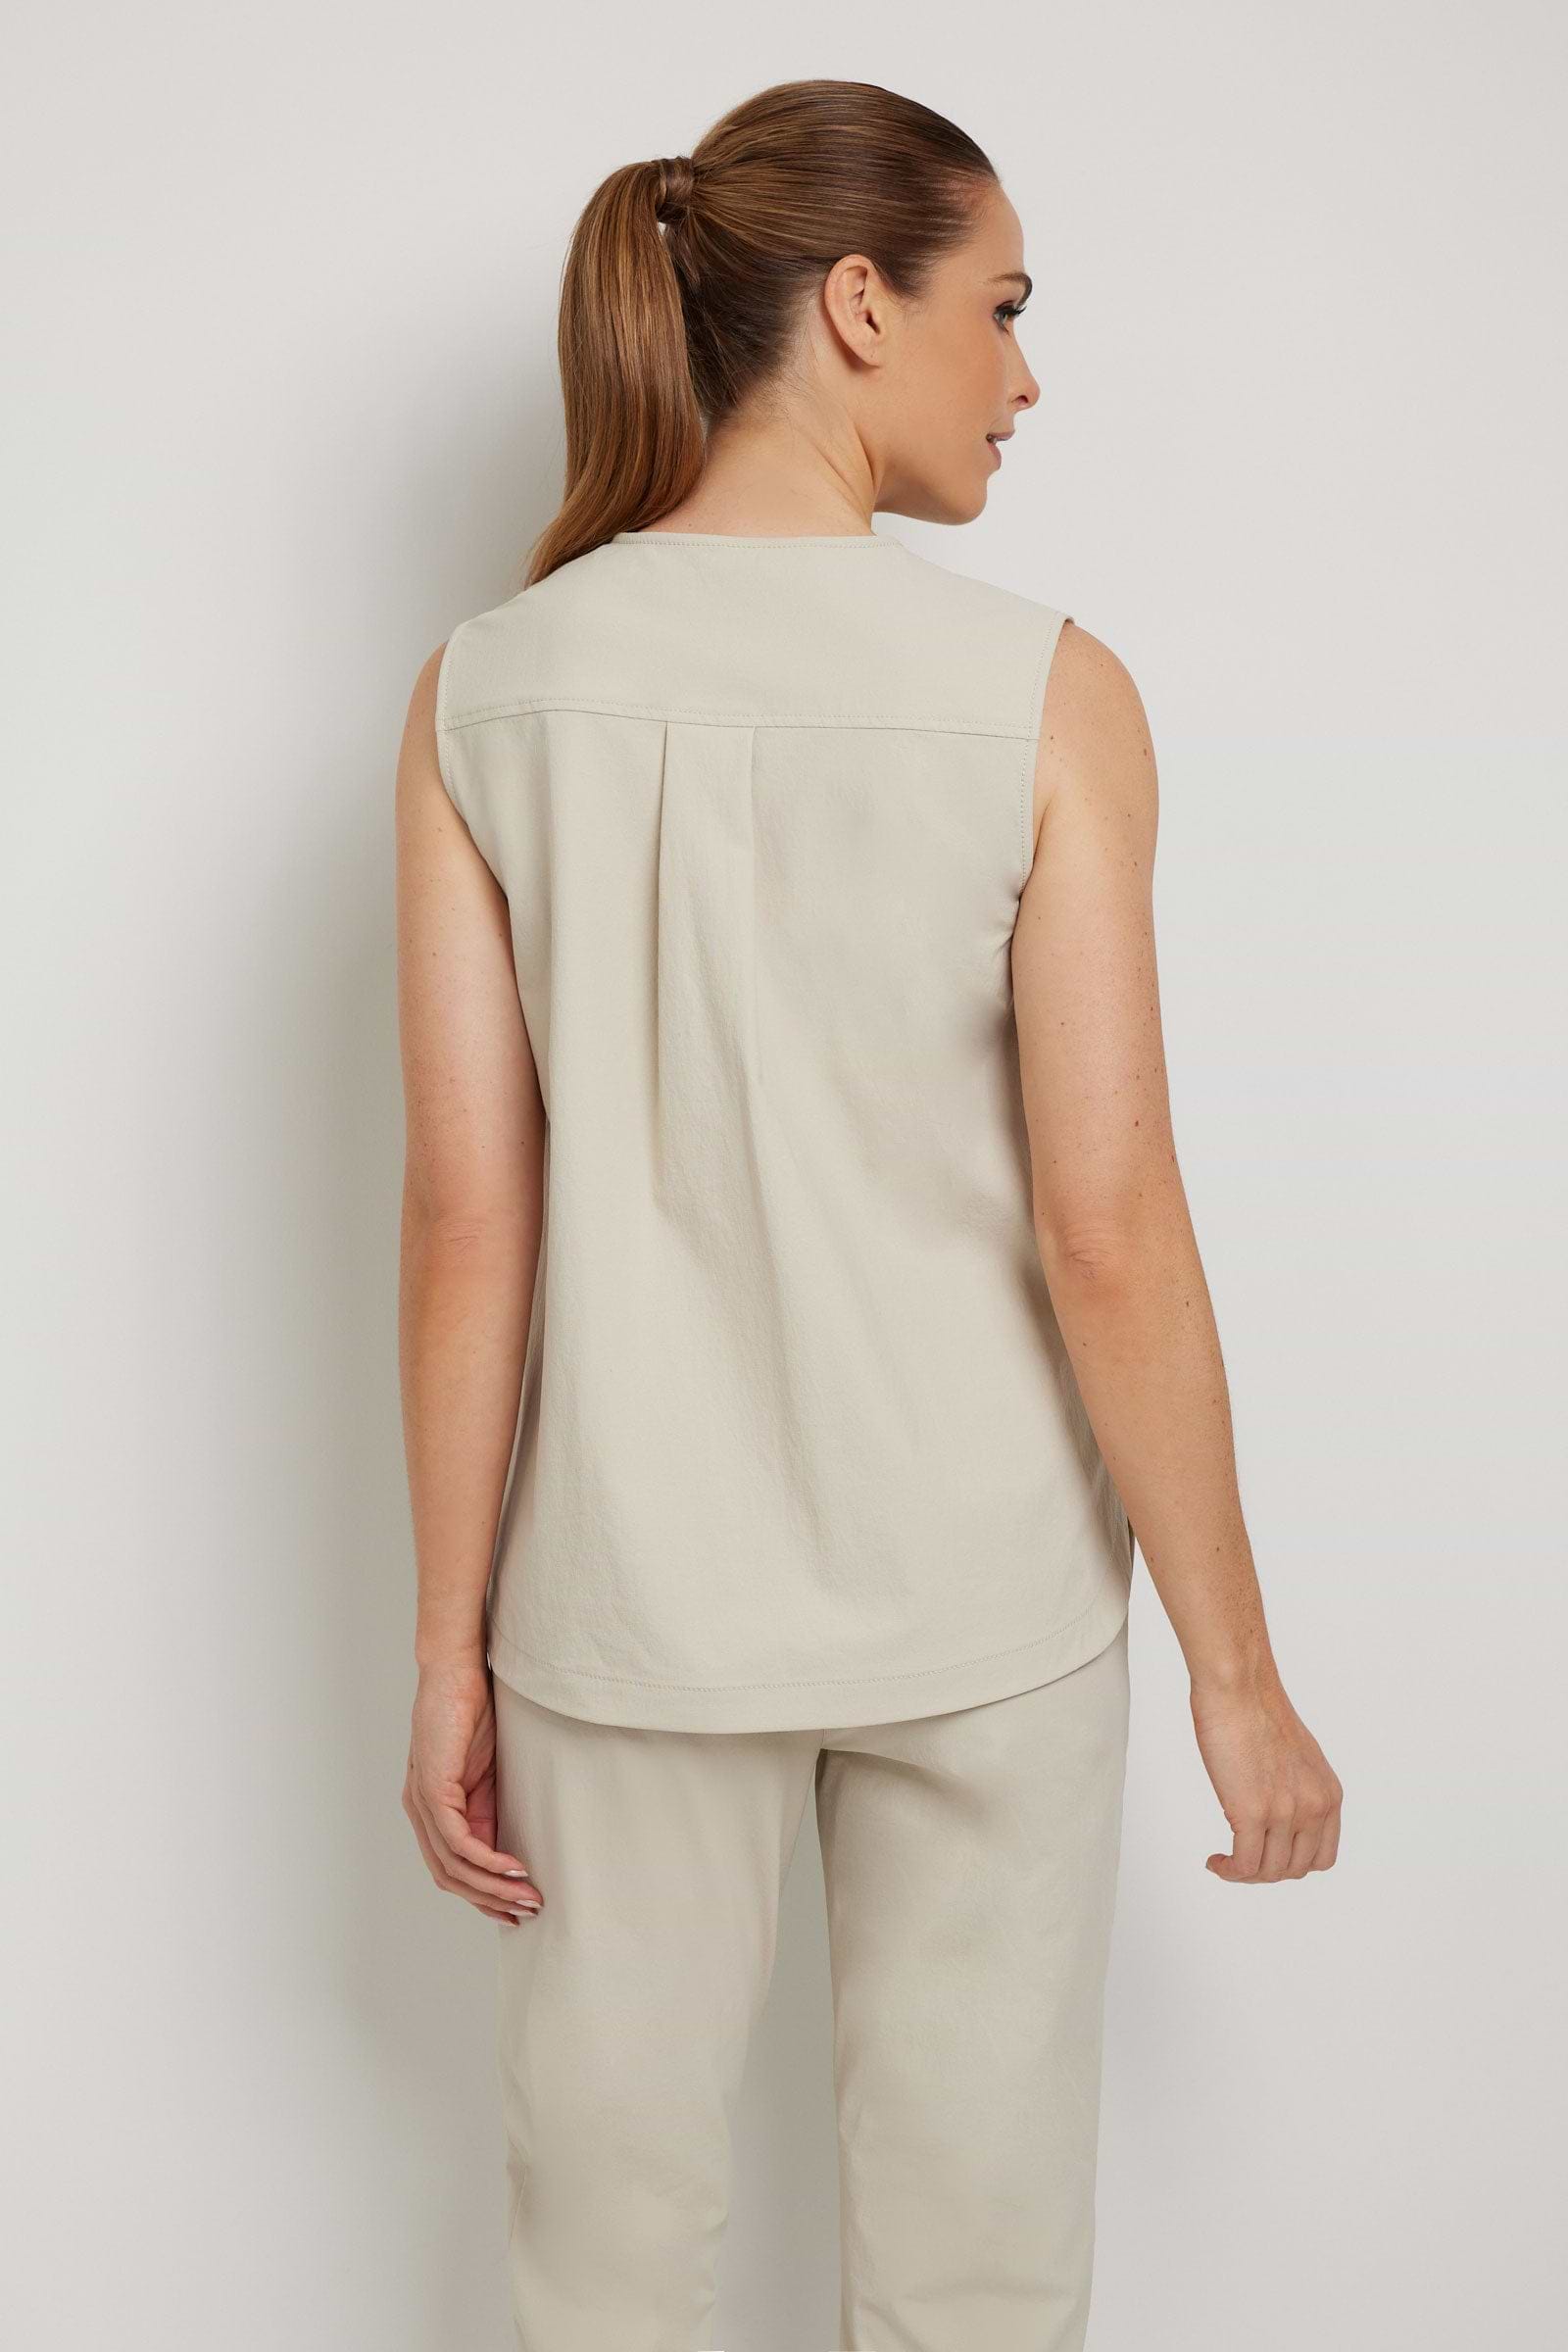 The Best Travel Top. Woman Showing the Back Profile of an Adley Top in Champagne.